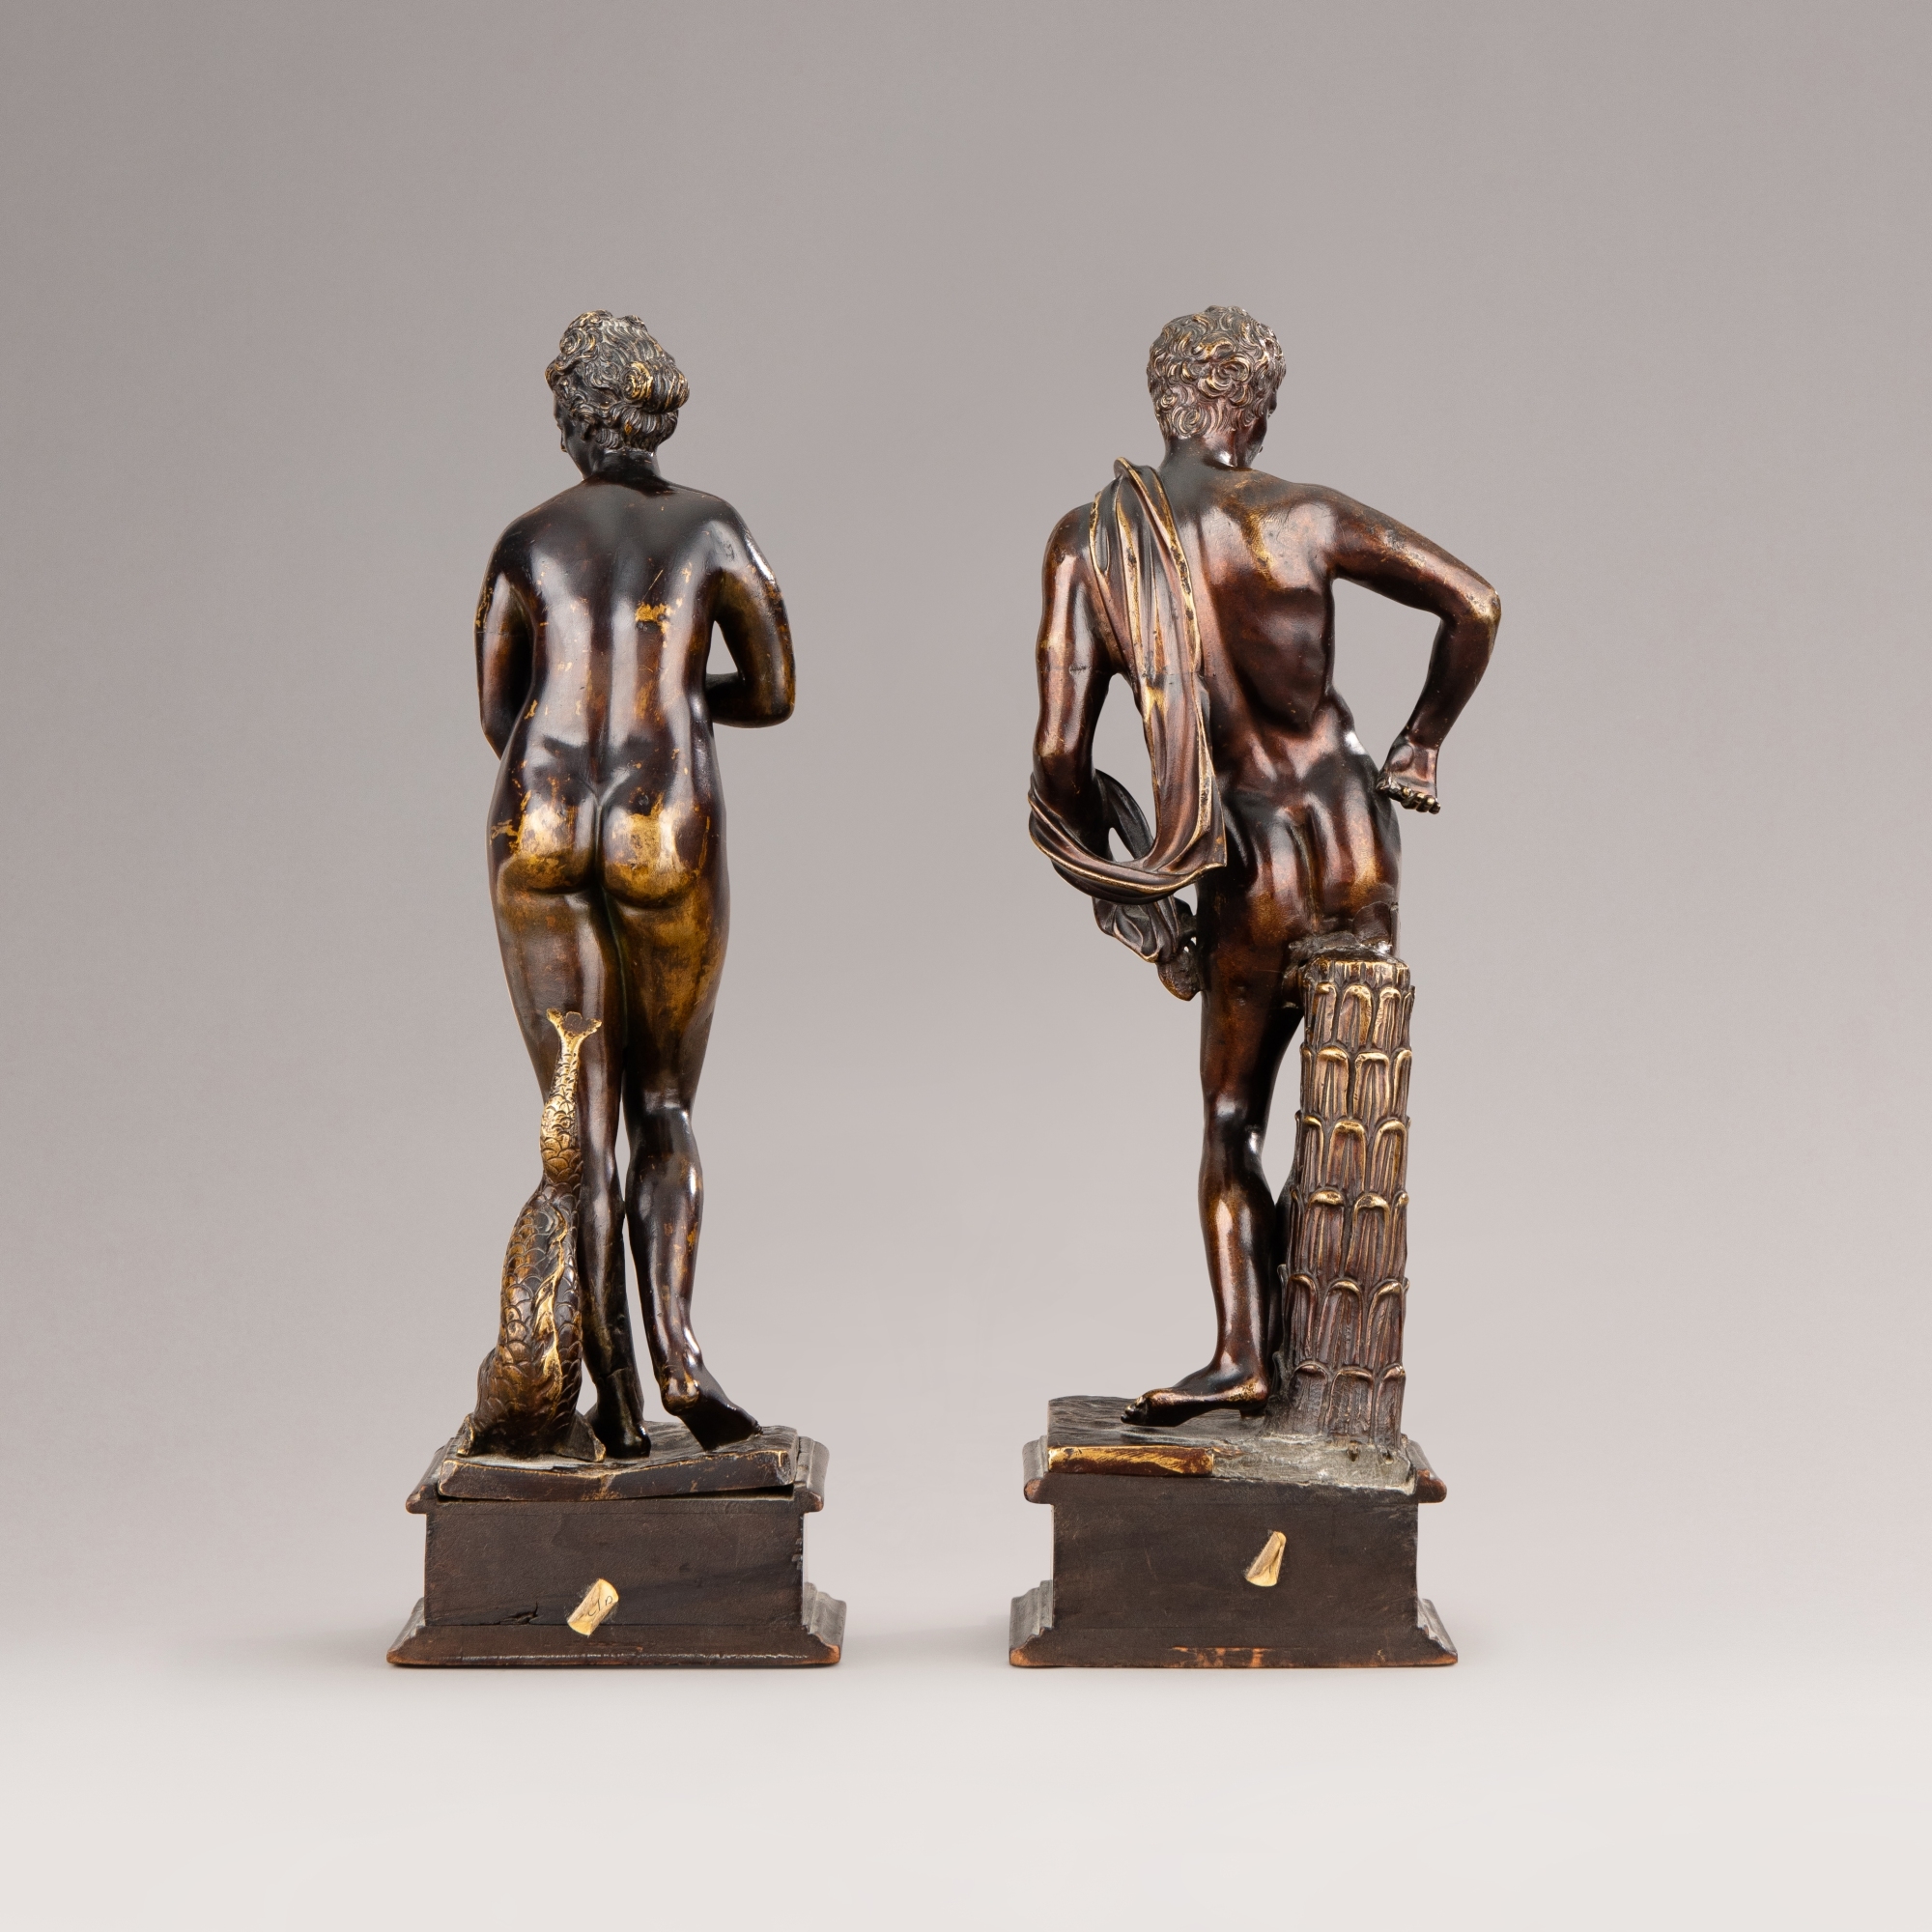 Artwork by French School, 18th Century, Vénus pudique & Antinoüs, Made of bronzes, brown patina